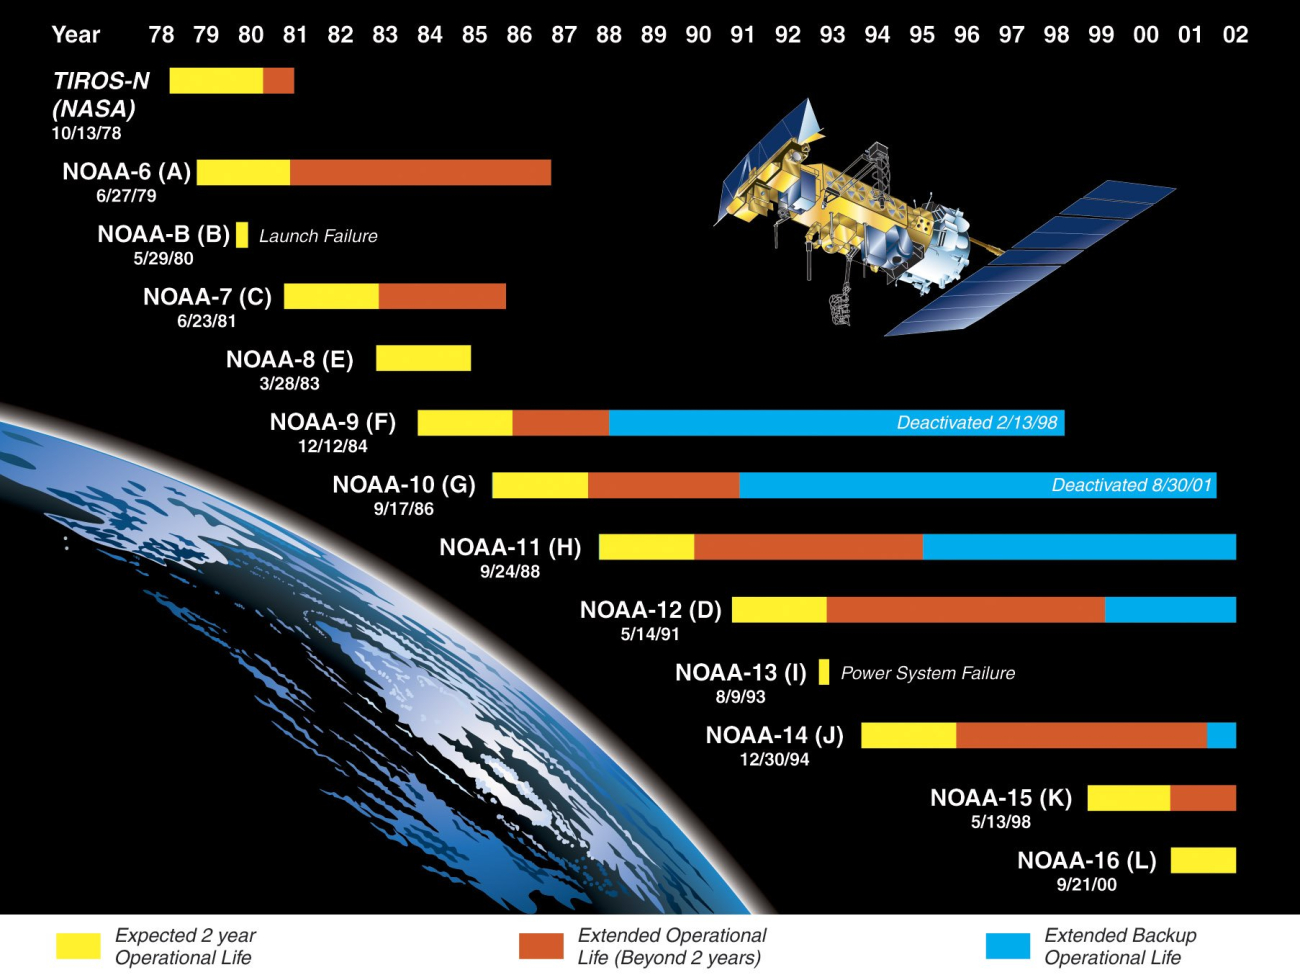 Graphic of operational life of various satellites of the NOAA-N design